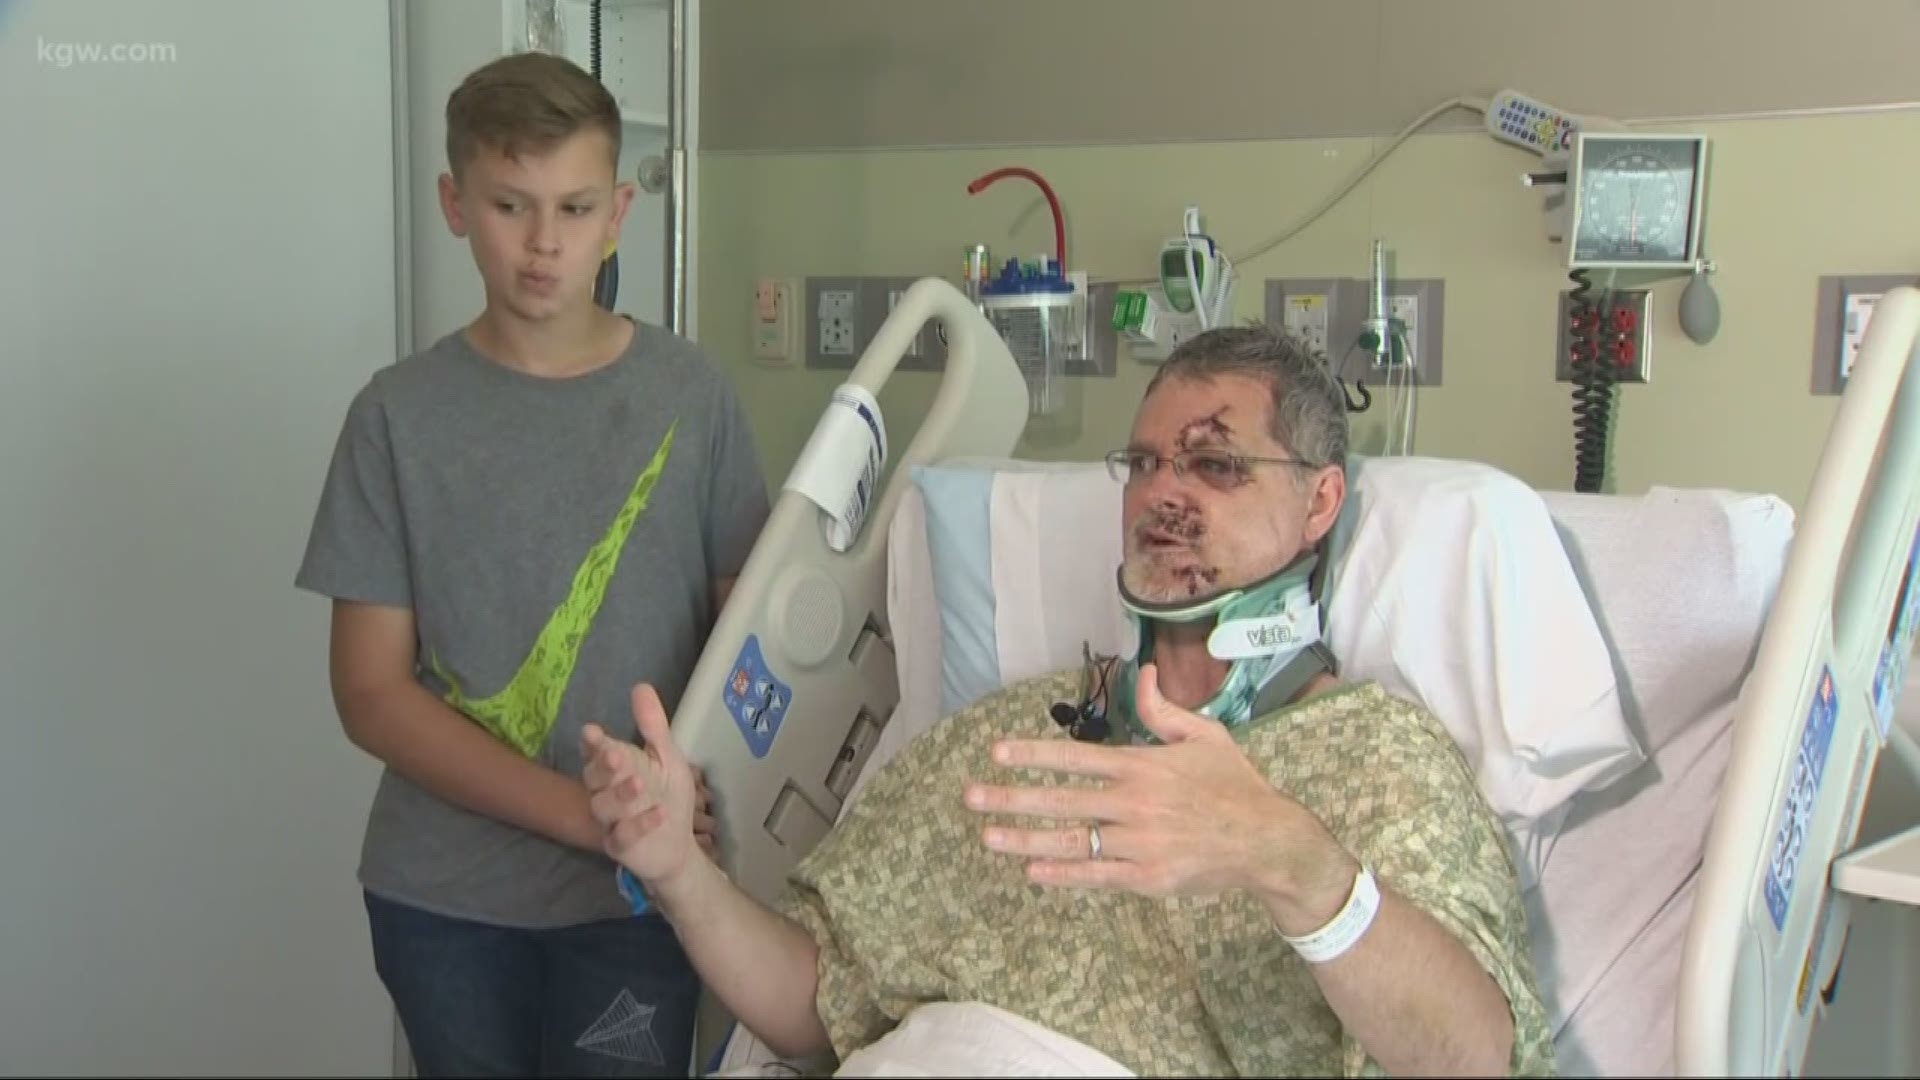 An act of heroism. A father jumped into Lucia Falls in an effort to save his son.